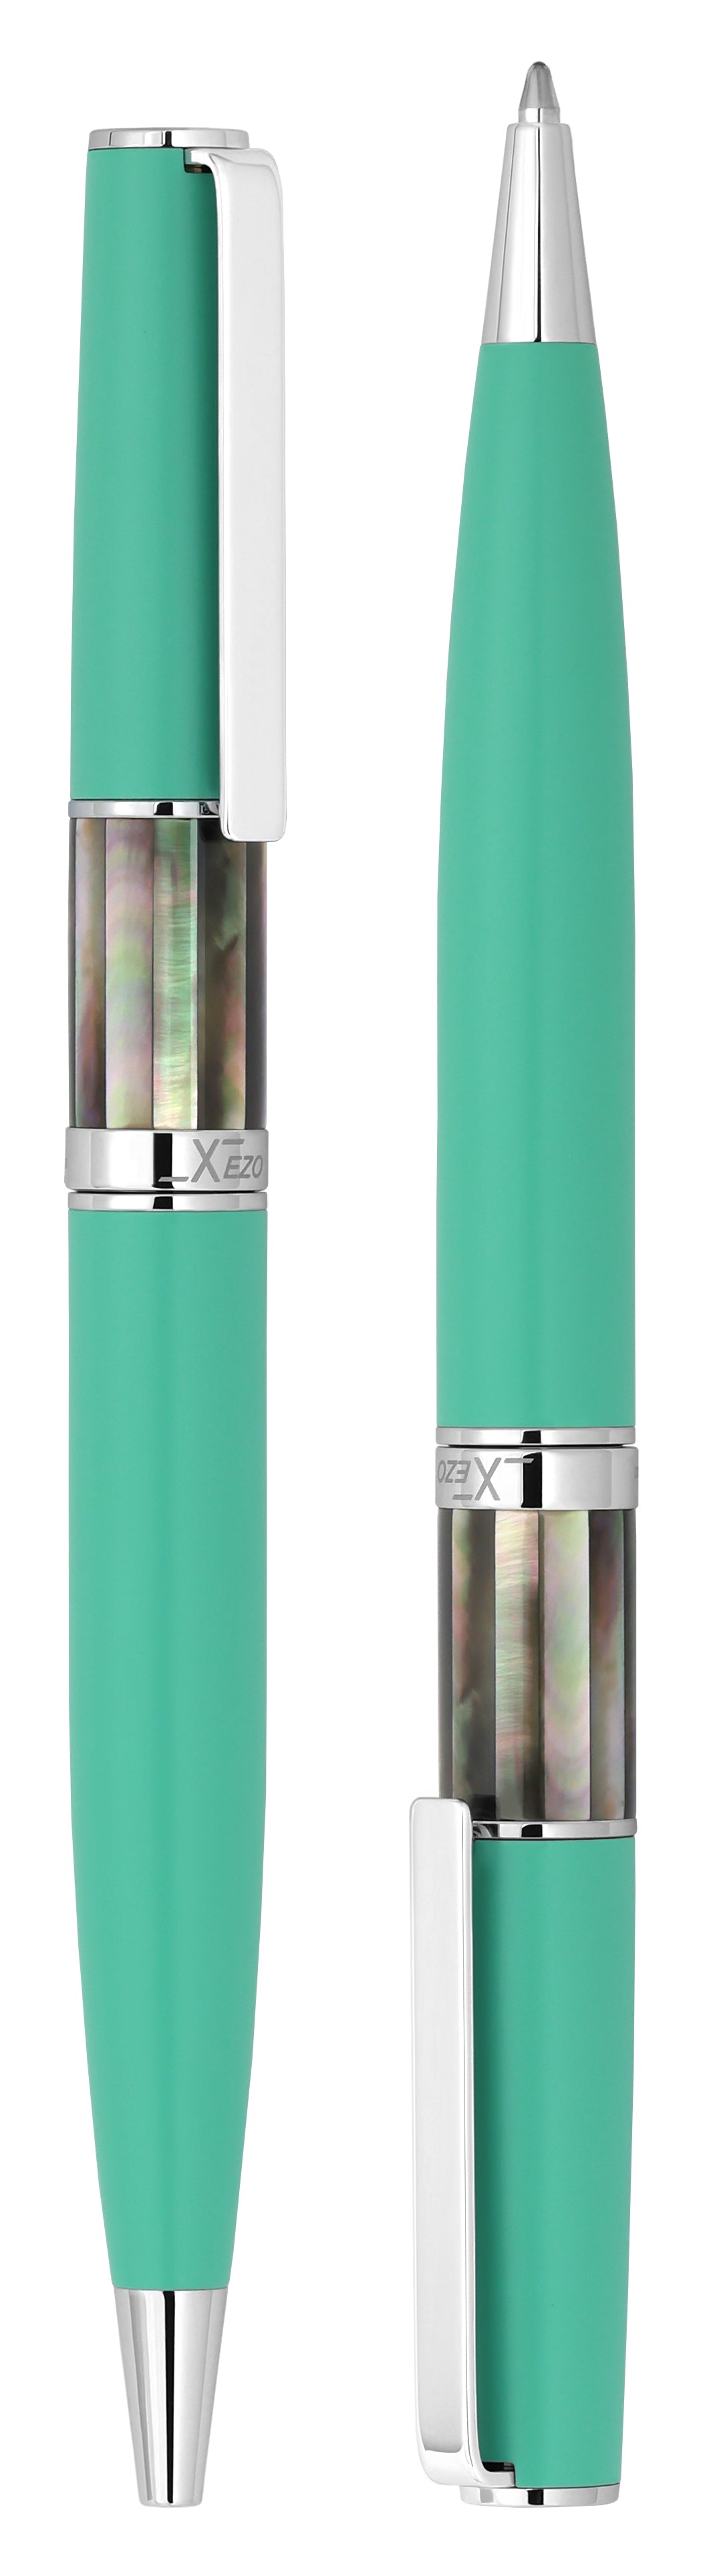 Xezo - Vertical view of two Speed Master Aqua Green B-BC Ballpoint pens; the one on the left has the point in, and the one on the right has the point out